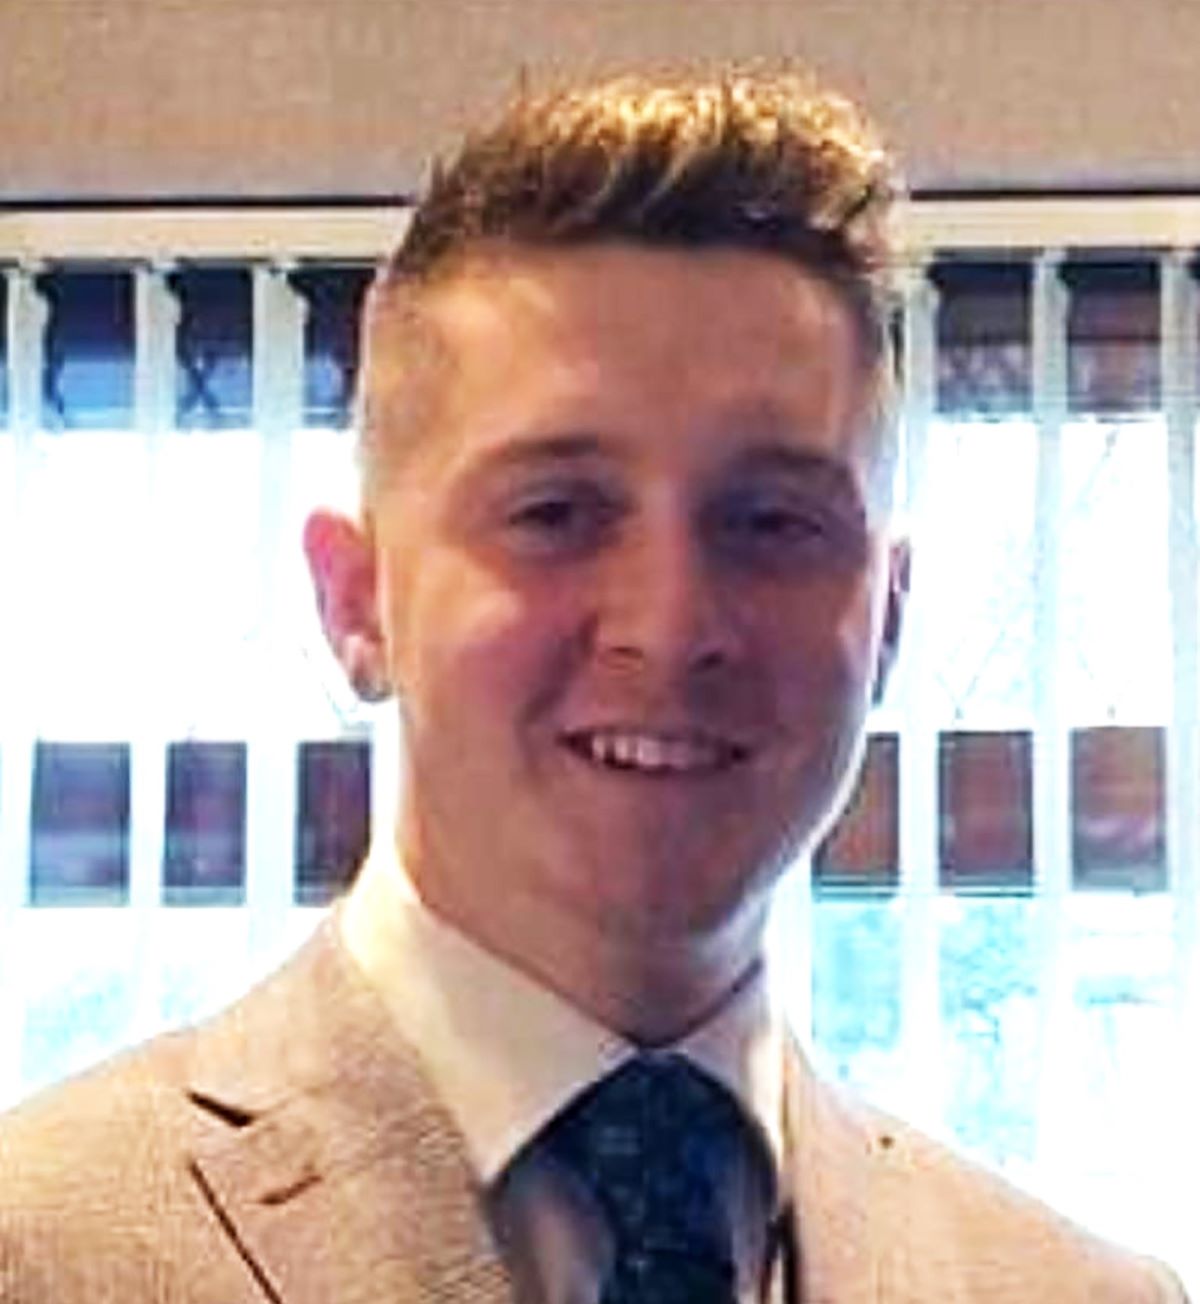 Funeral announced for young man killed in A5 road collision